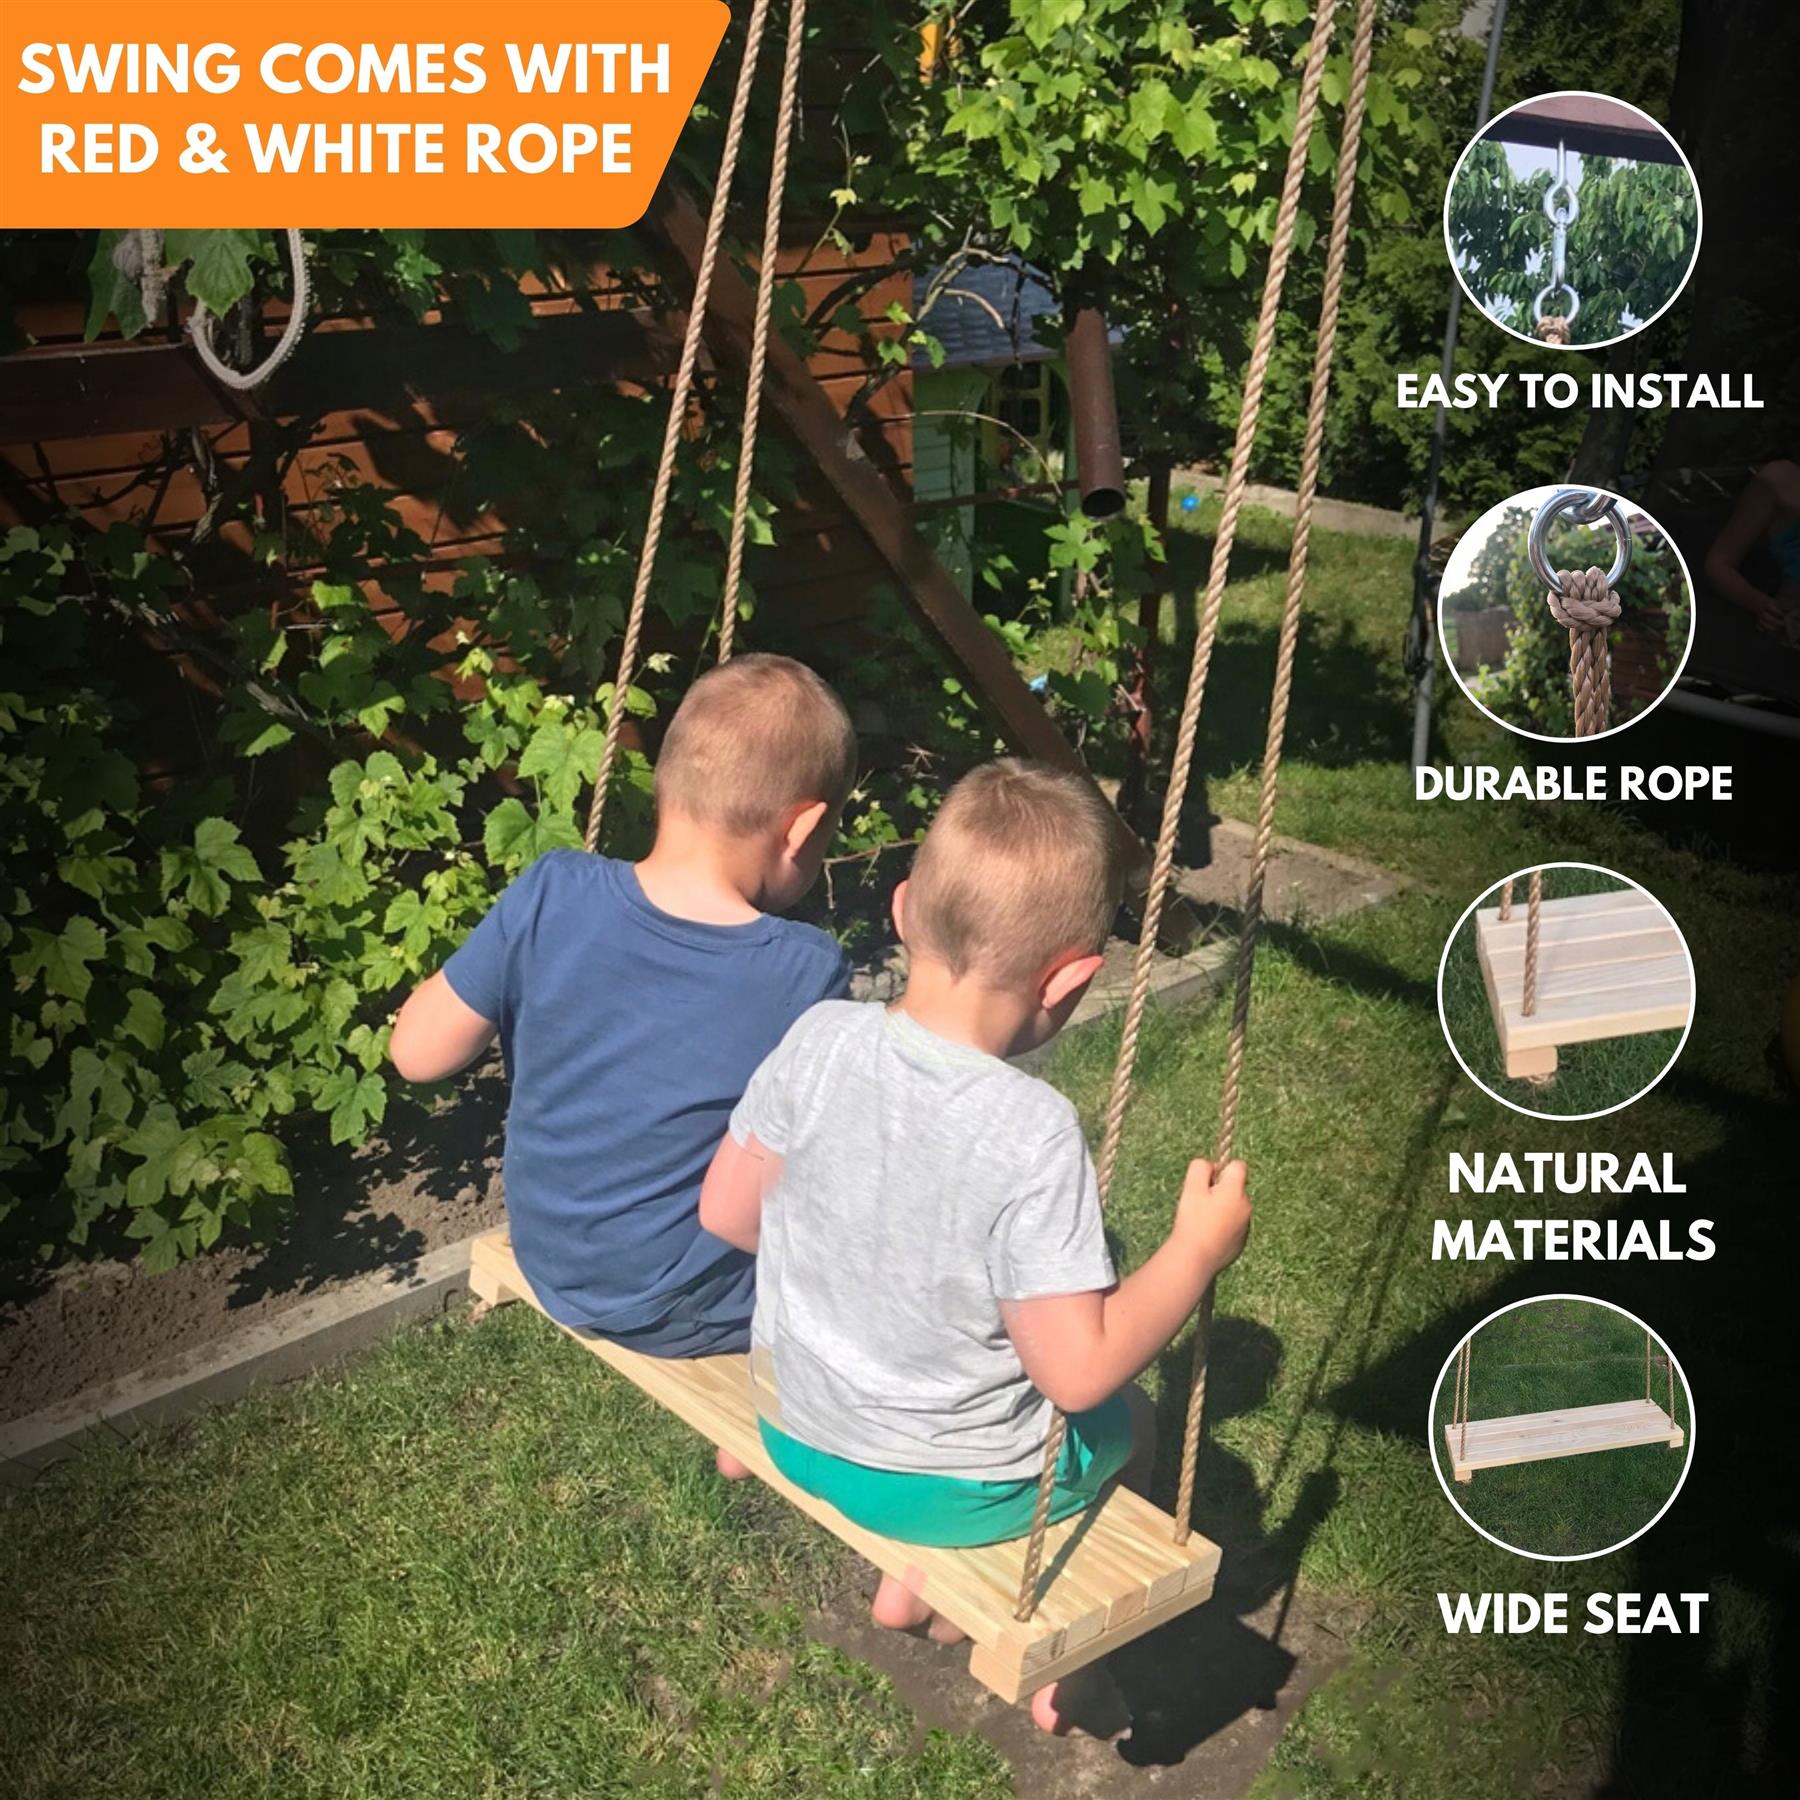 Wooden Garden Swing for Indoor Or Outdoor 27.5 inches (70 cm) Length Garden Seat - Porch Tree Swing Seat Set With Rope & Wide Seat